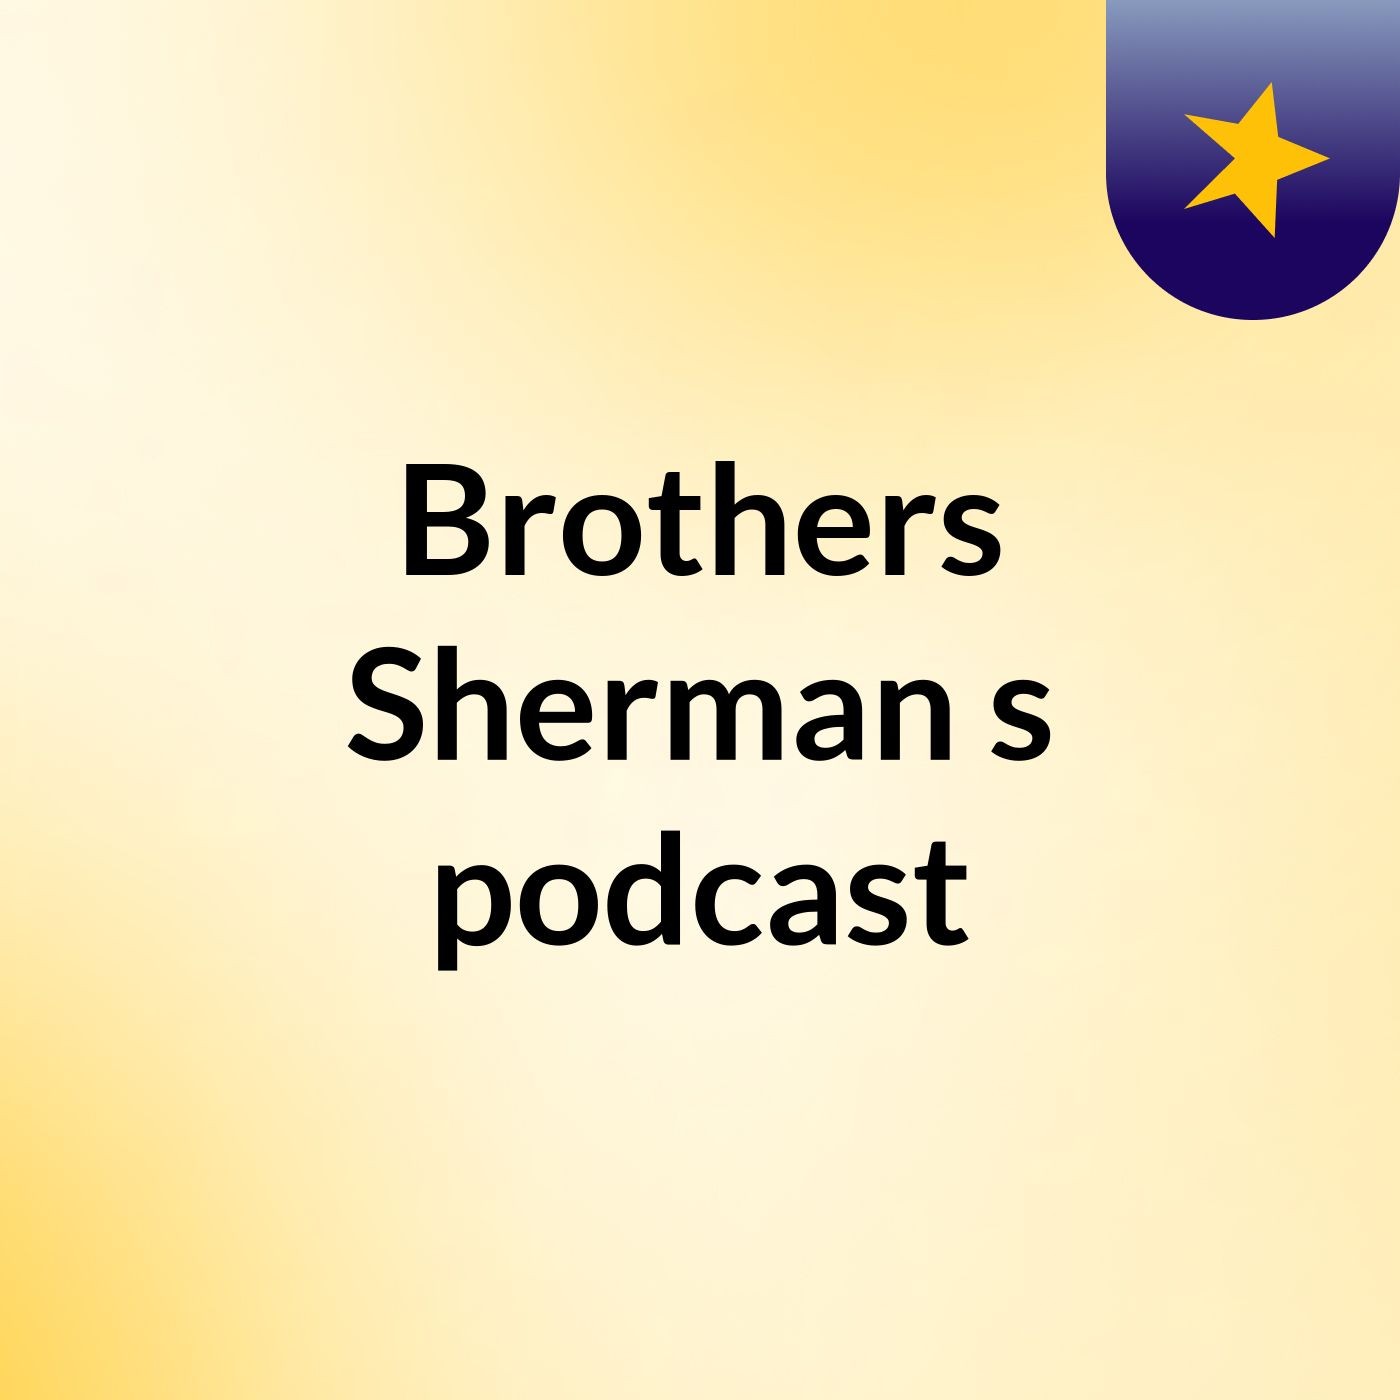 Brothers Sherman's podcast